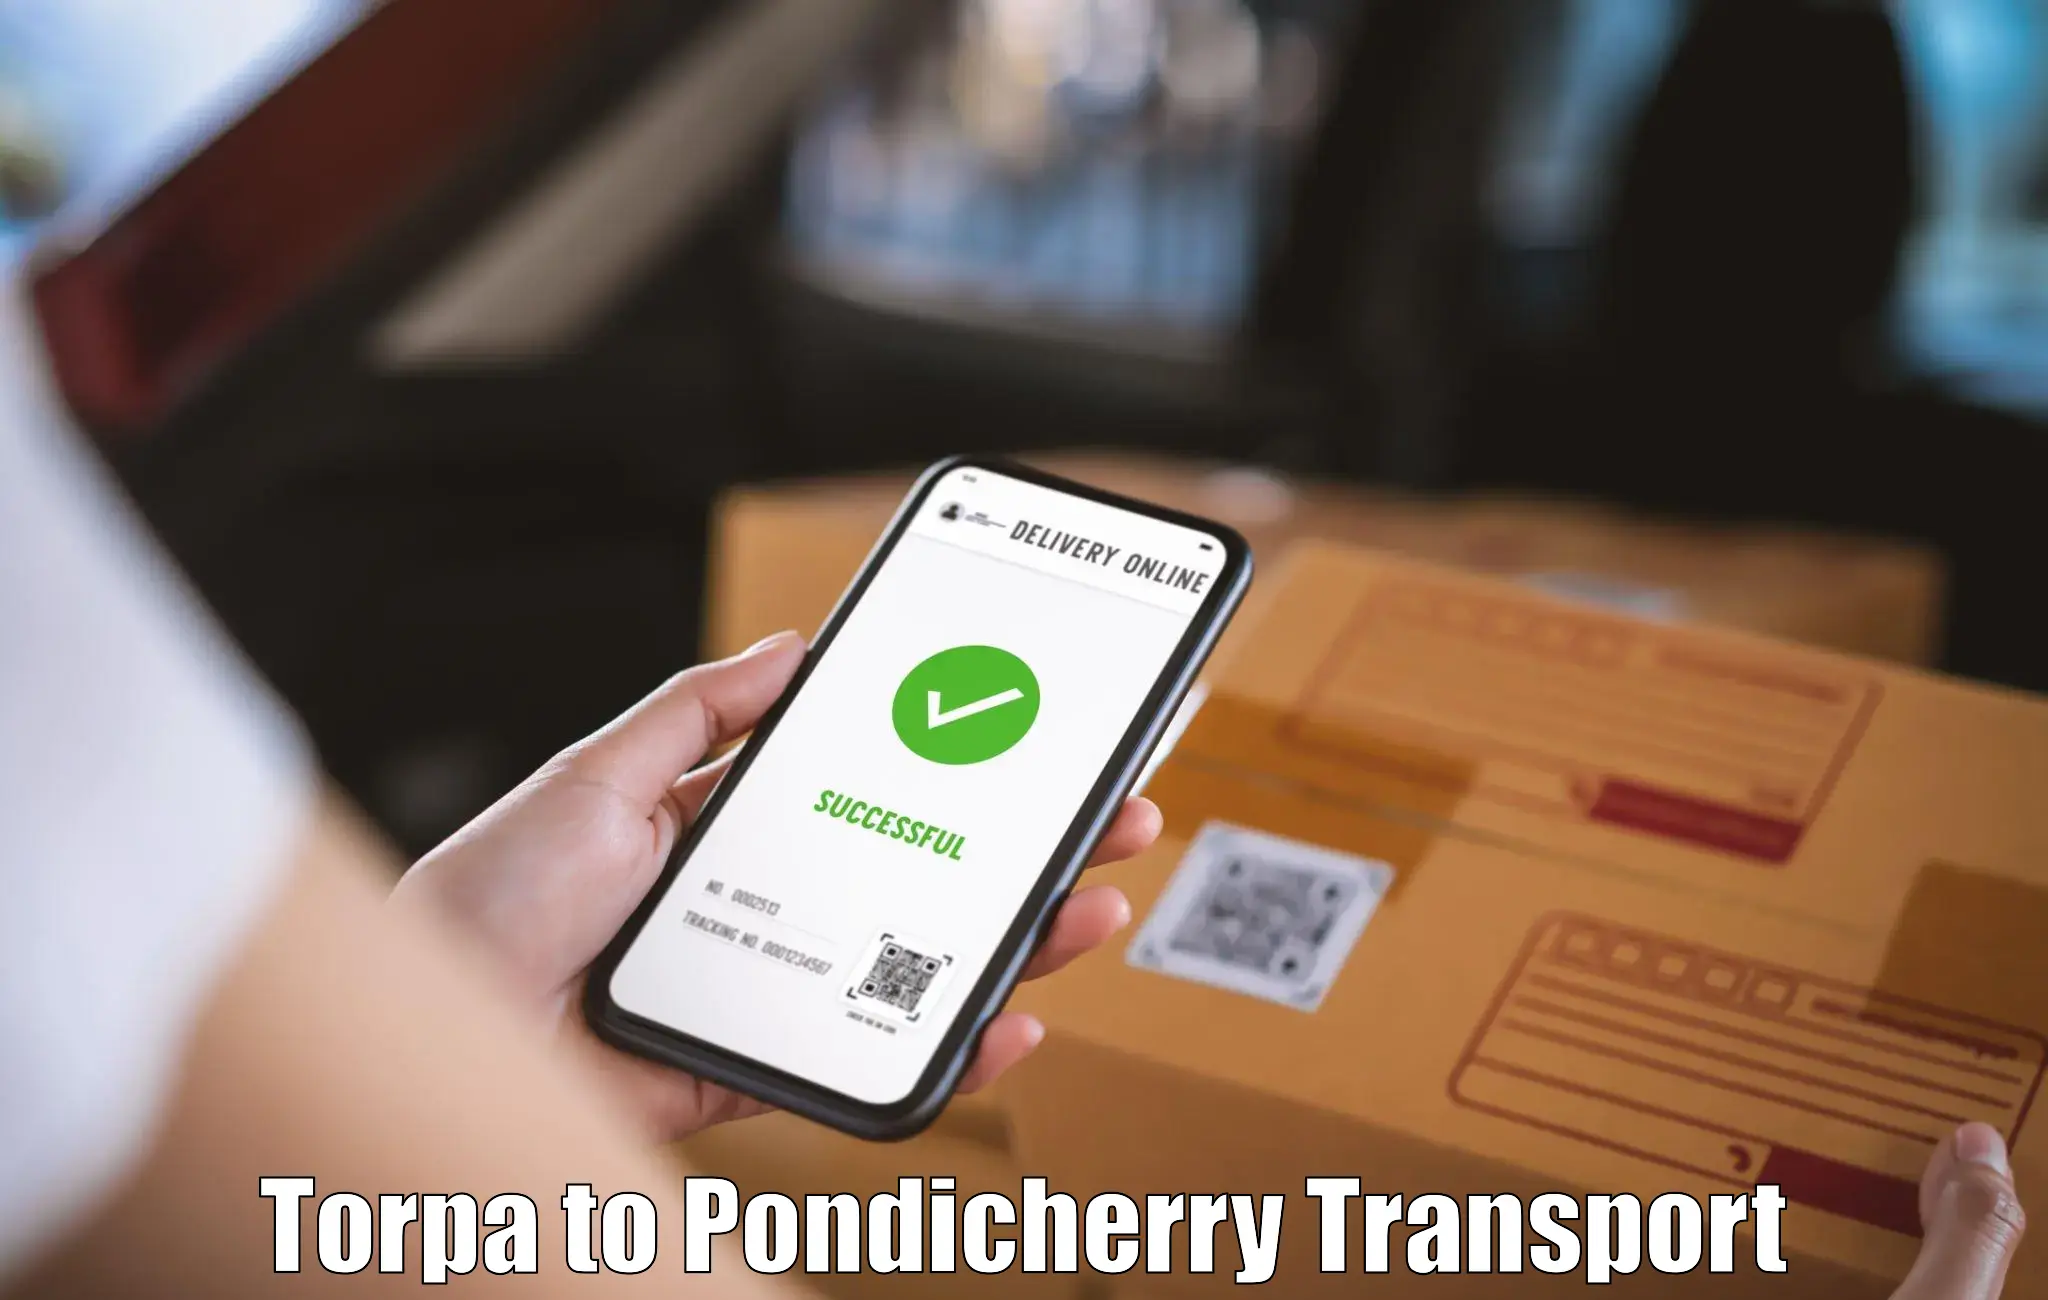 Transport in sharing Torpa to Pondicherry